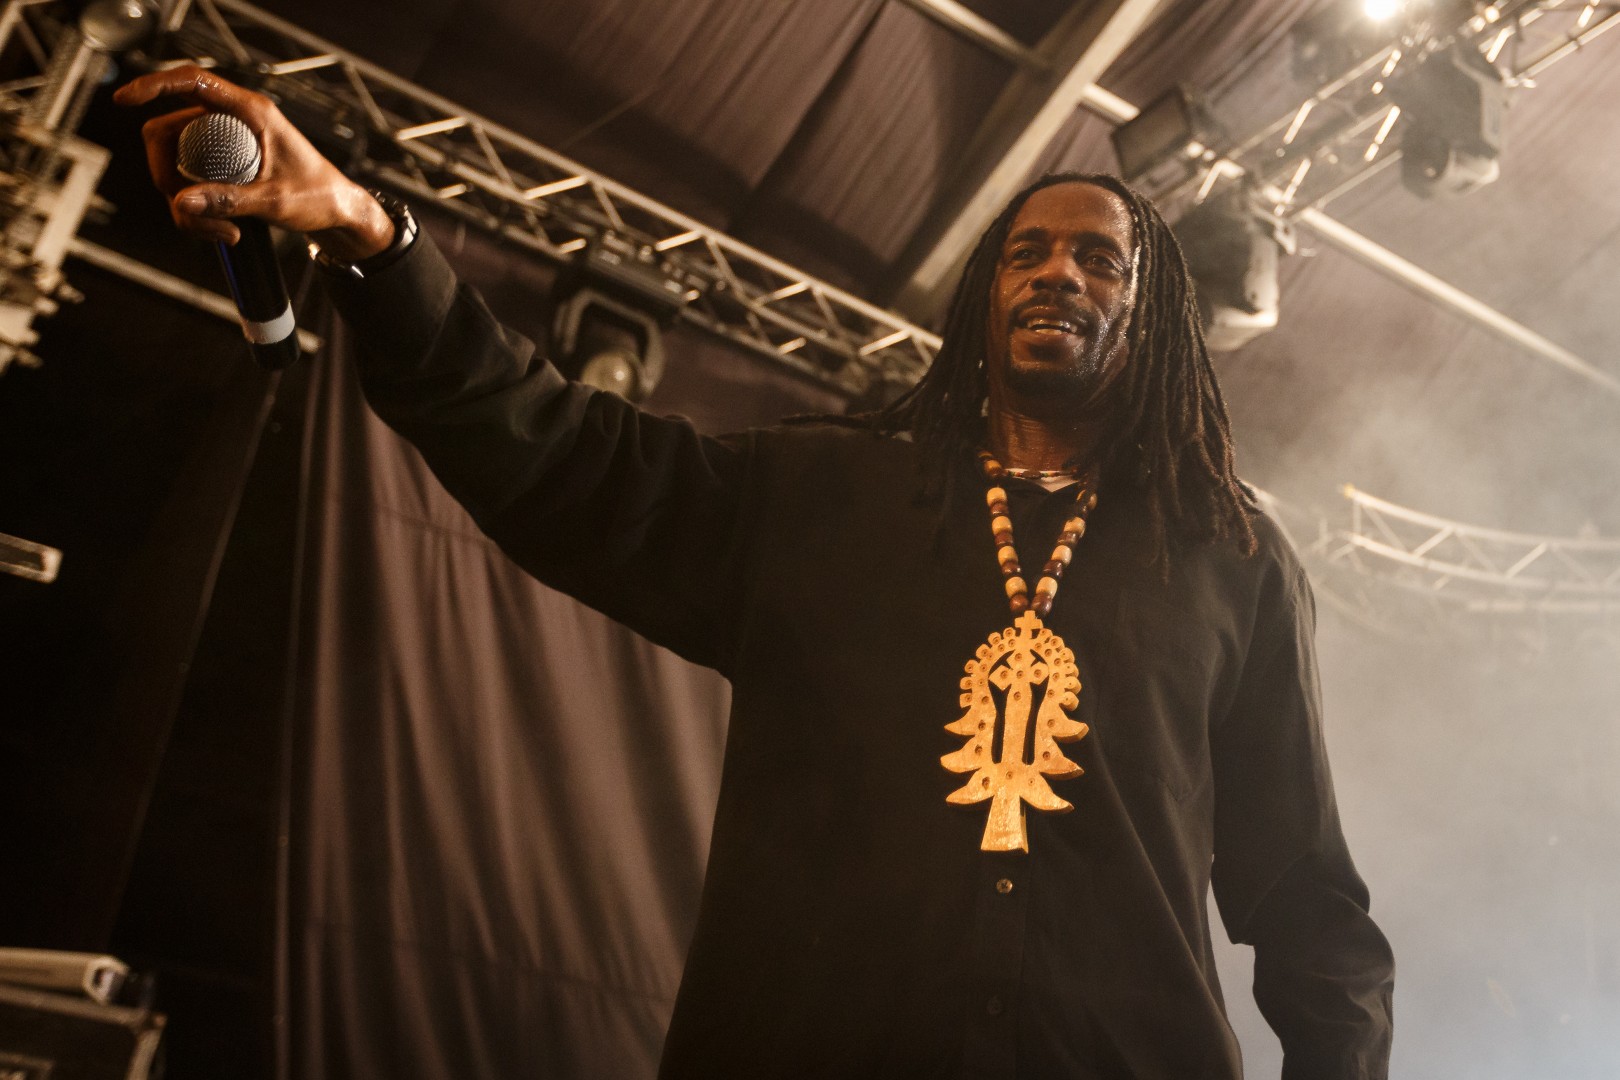 General Levy at Arenele Romane in Bucharest on April 23, 2016 (61e82ccae6)